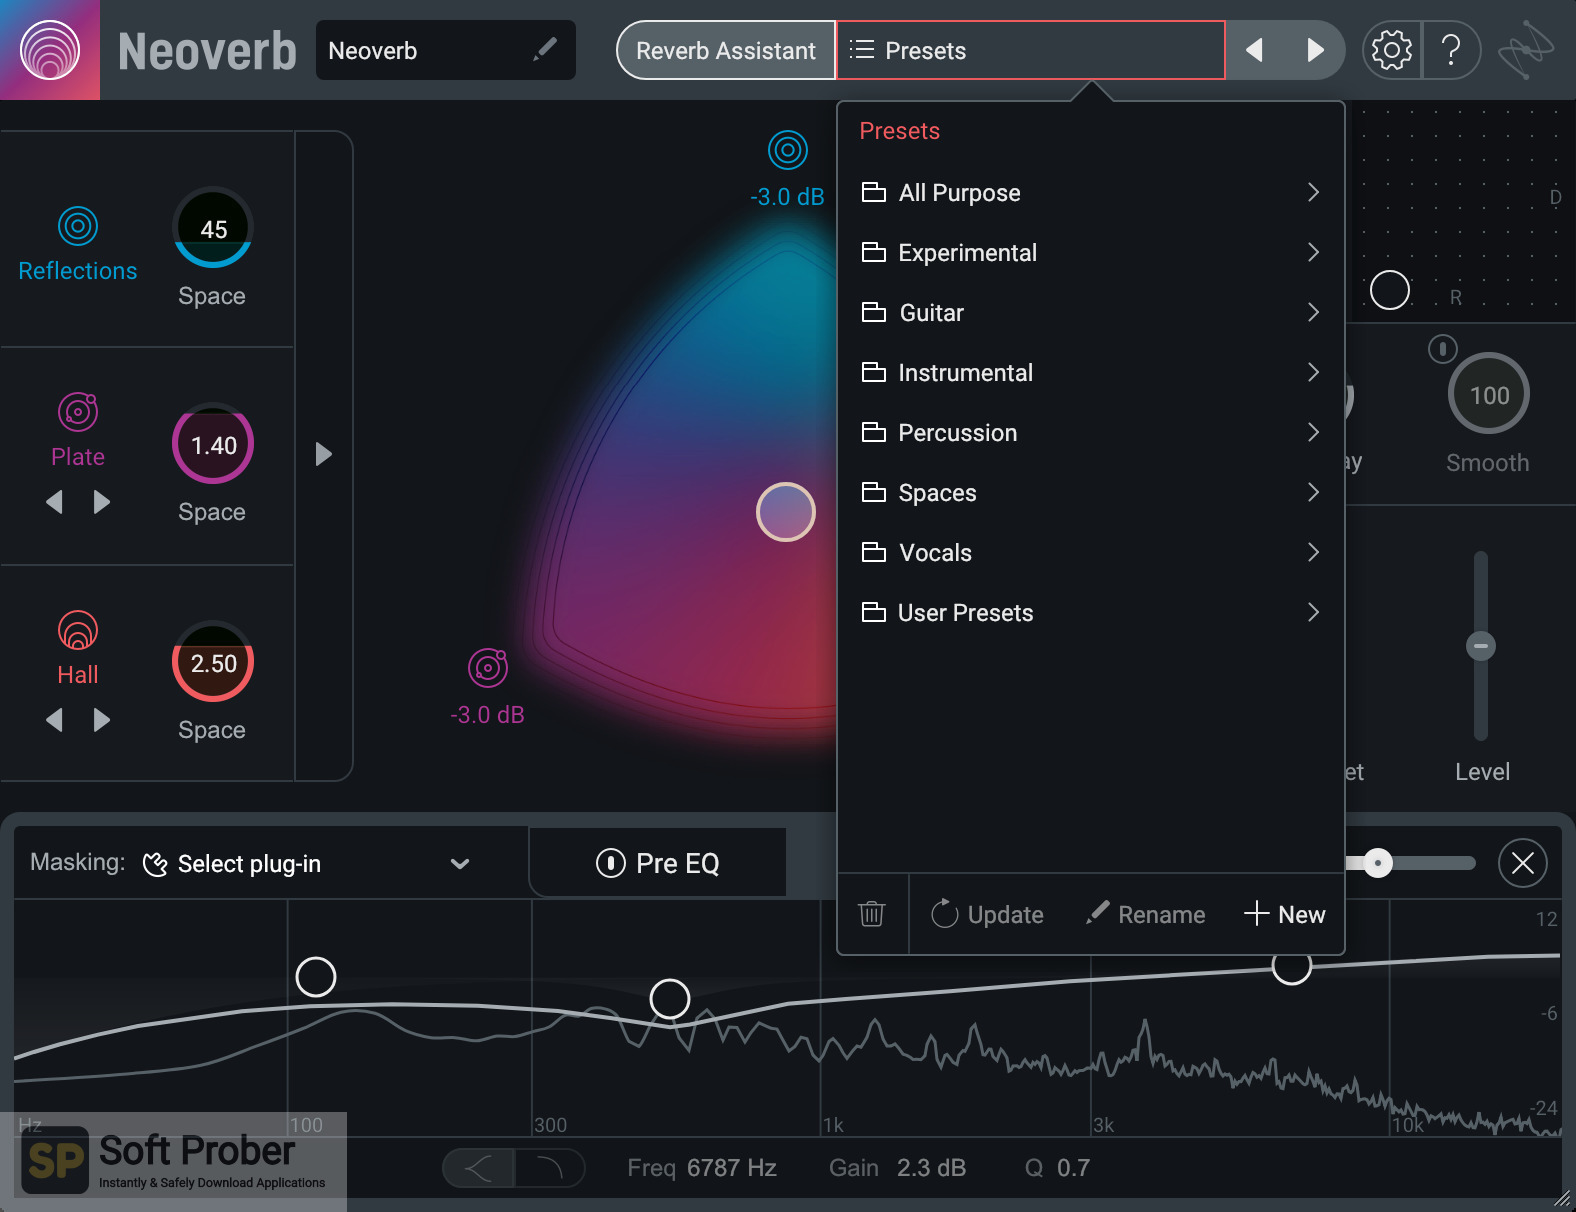 iZotope Neoverb 1.3.0 free download